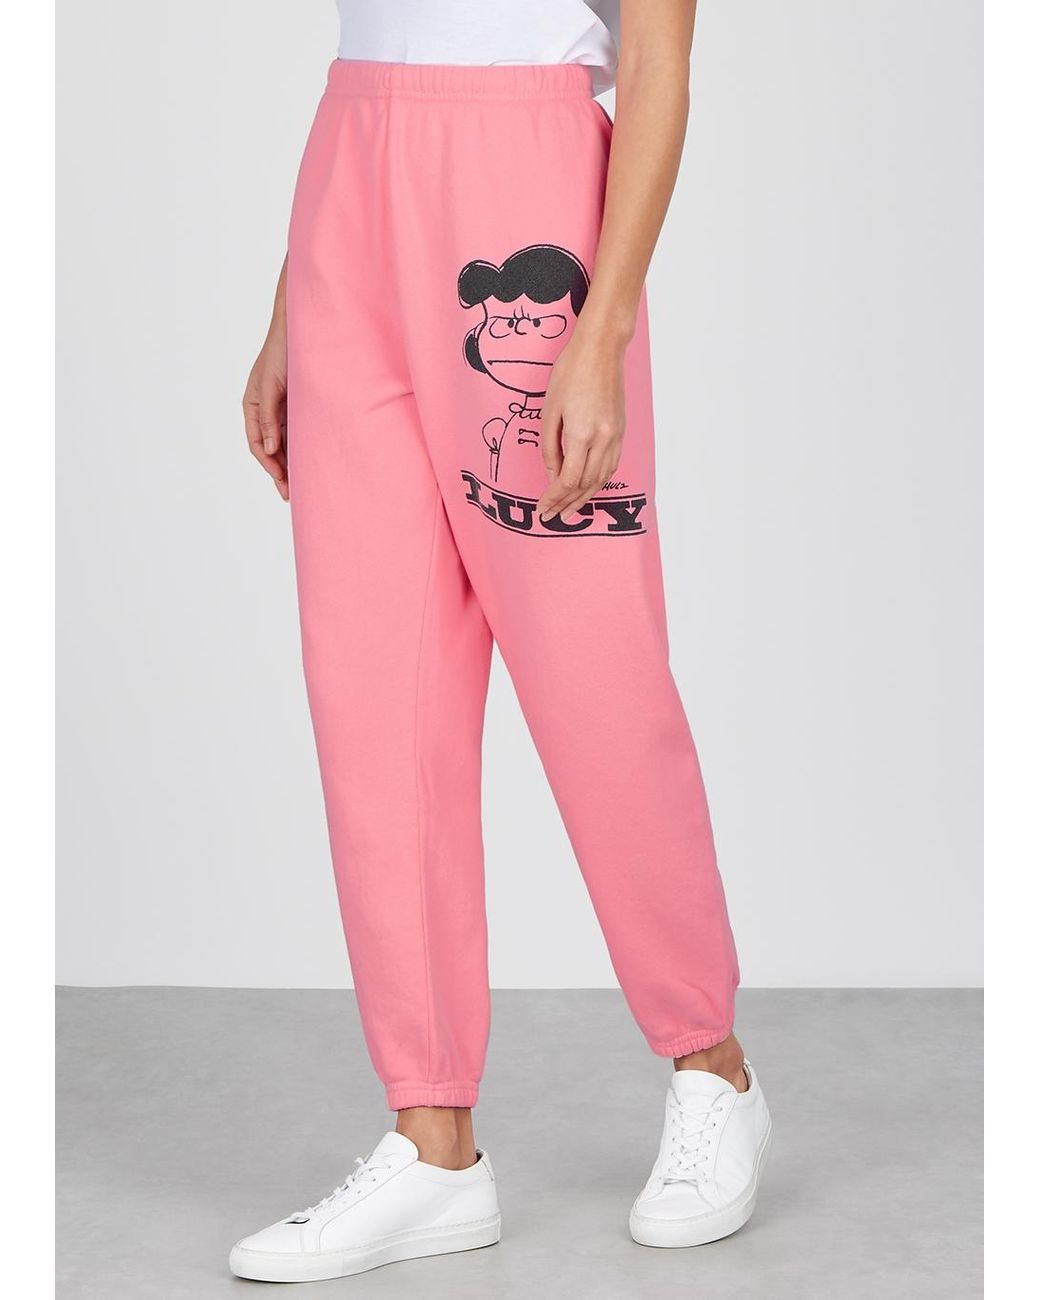 Marc Jacobs X Peanuts Lucy Cotton-jersey Sweatpants in Pink | Lyst